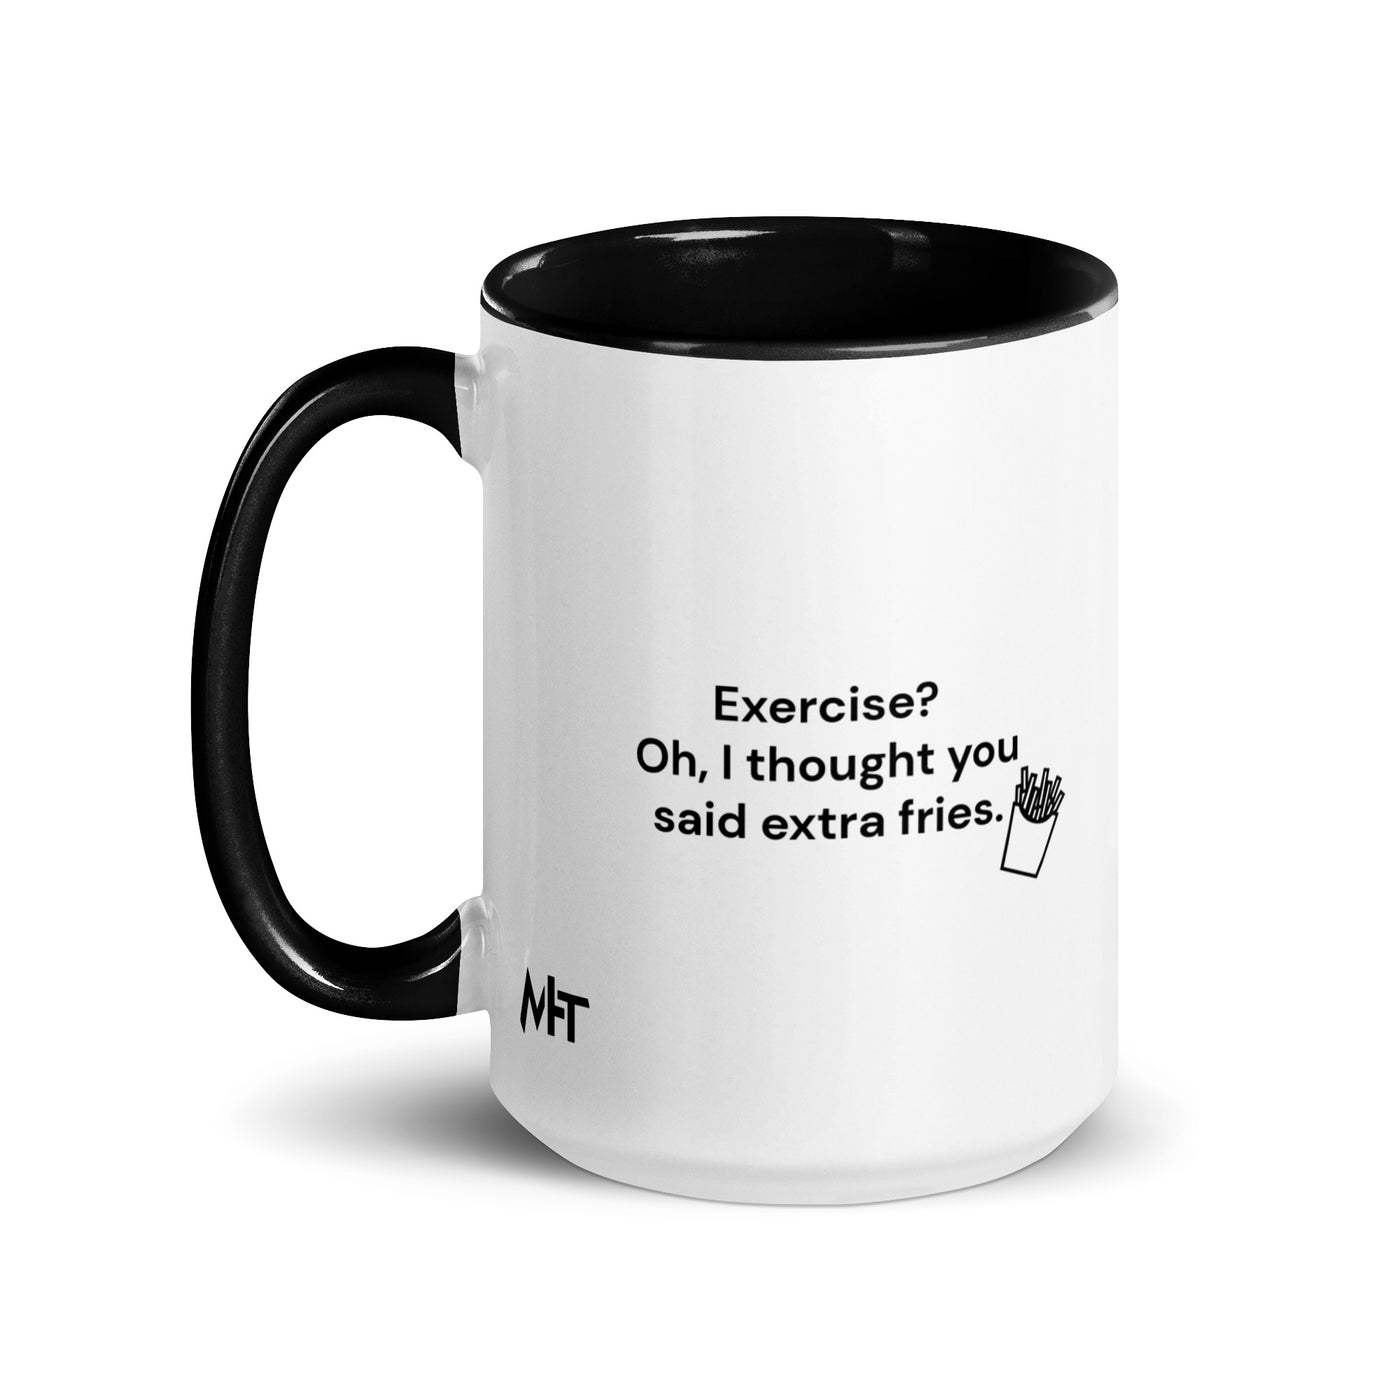 Exercise? Oh, I thought you said extra fries - Mug with Color Inside